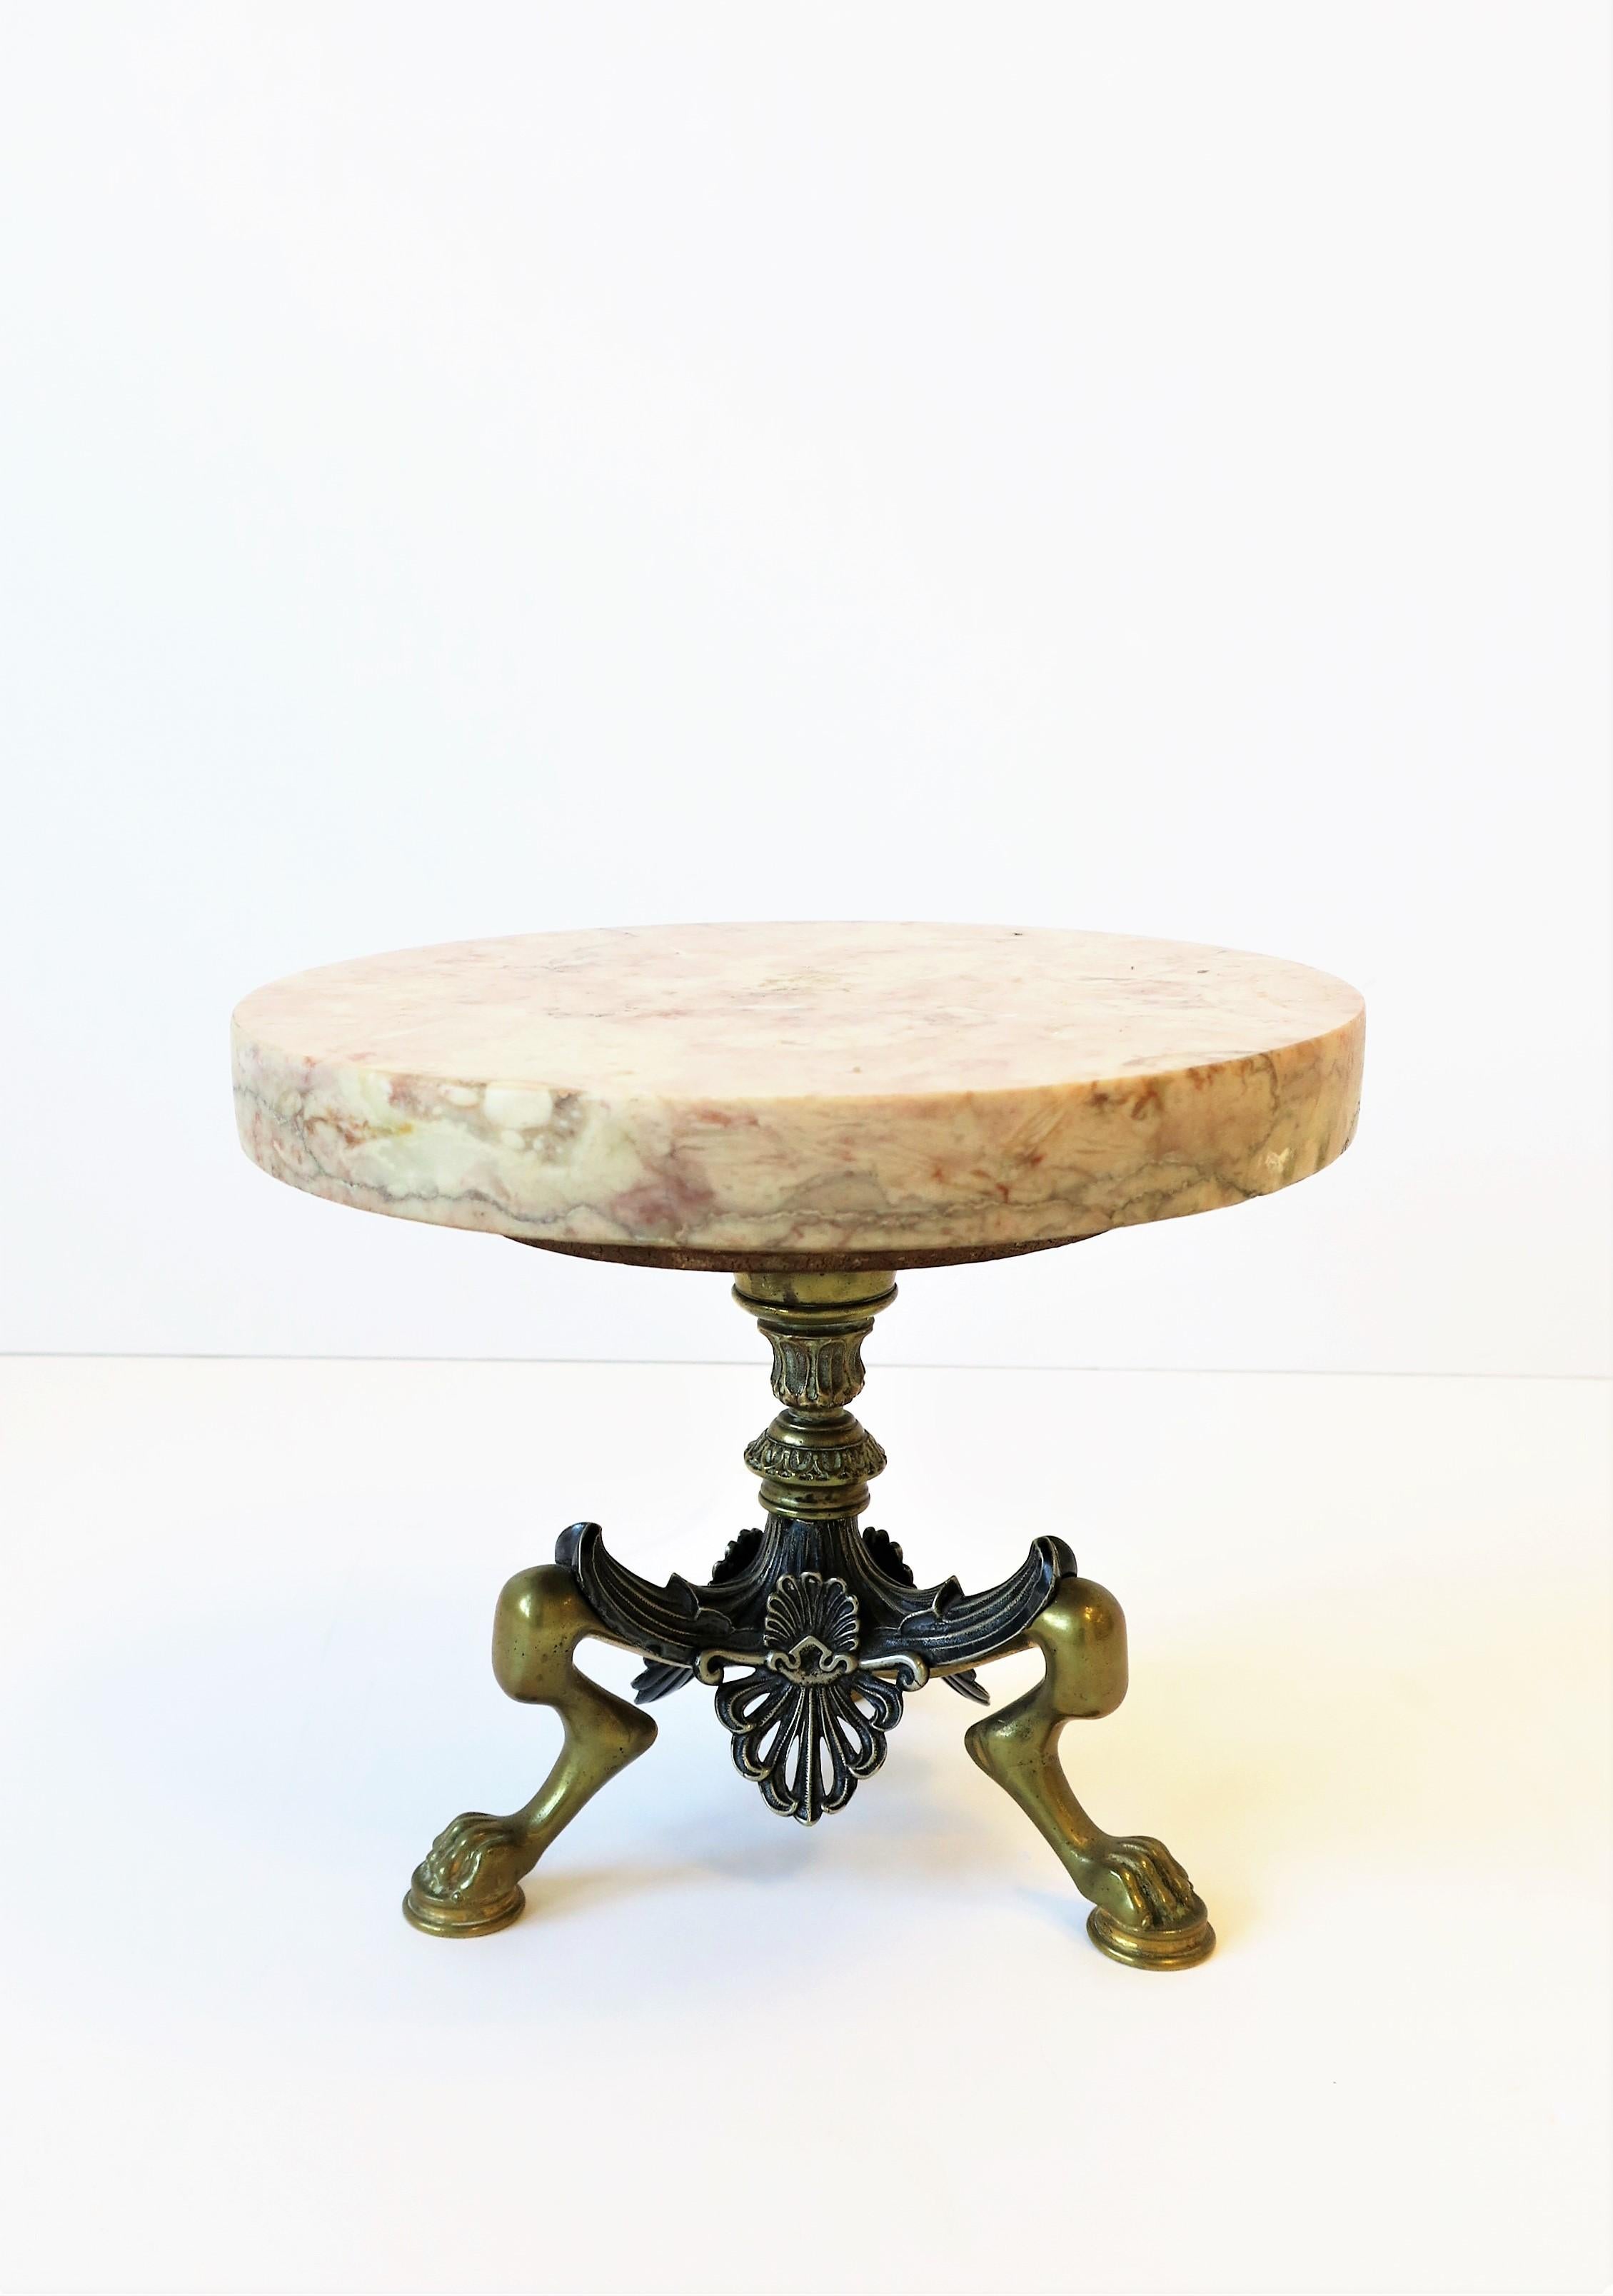 Marble and Brass Round Pedestal with Lion Paw Feet Plant Stand Regency Style For Sale 1